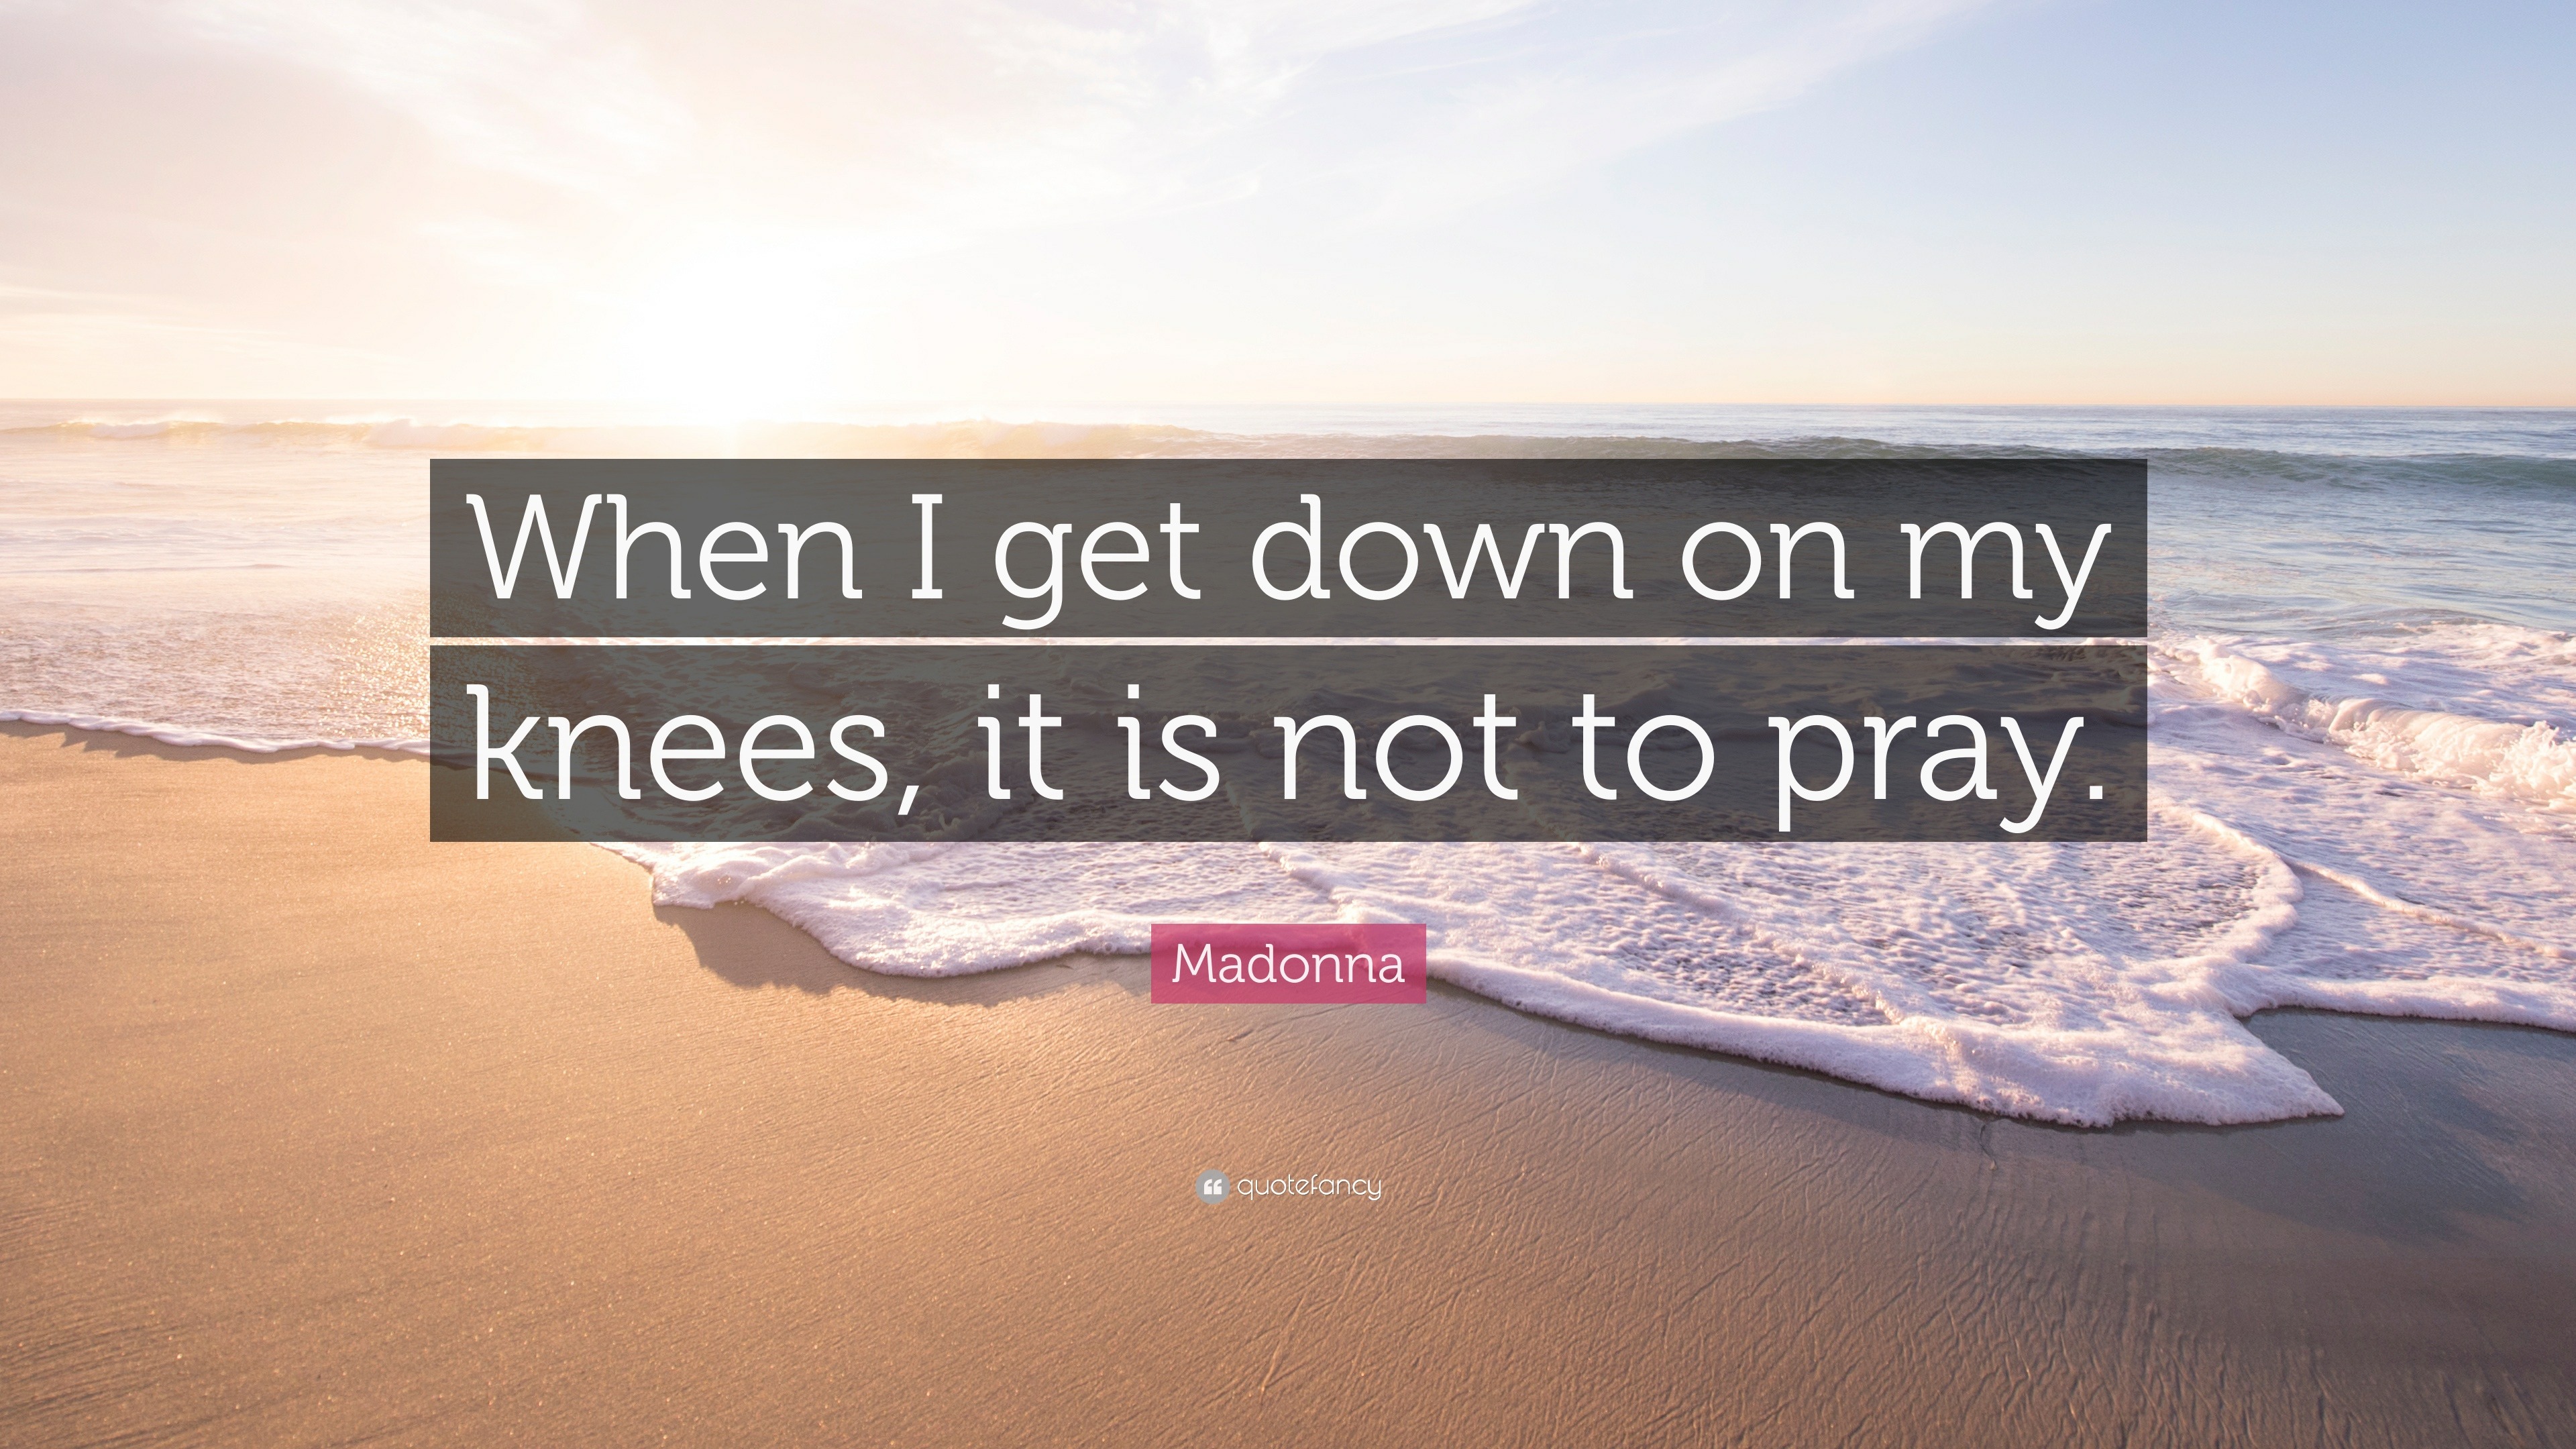 Madonna Quote “when I Get Down On My Knees It Is Not To Pray” 2388